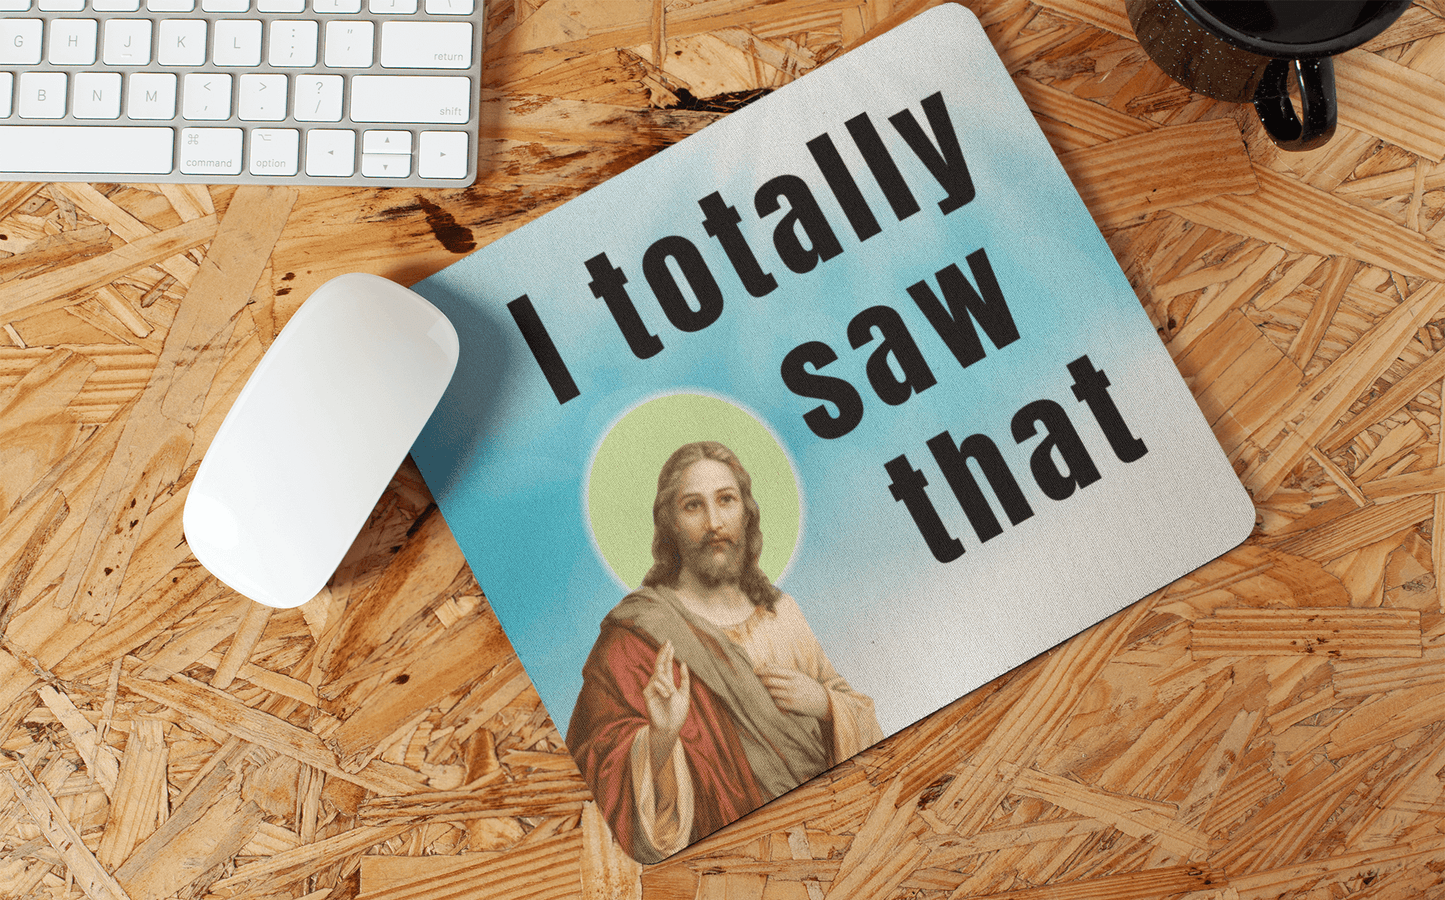 Jesus - I totally saw that - Mouse pad funny mouse pad I saw that Jesus Meme Jesus mousepad mouse pad mouse pad cute mouse pad funny mousepad for desk mousepad for her mousepad for men